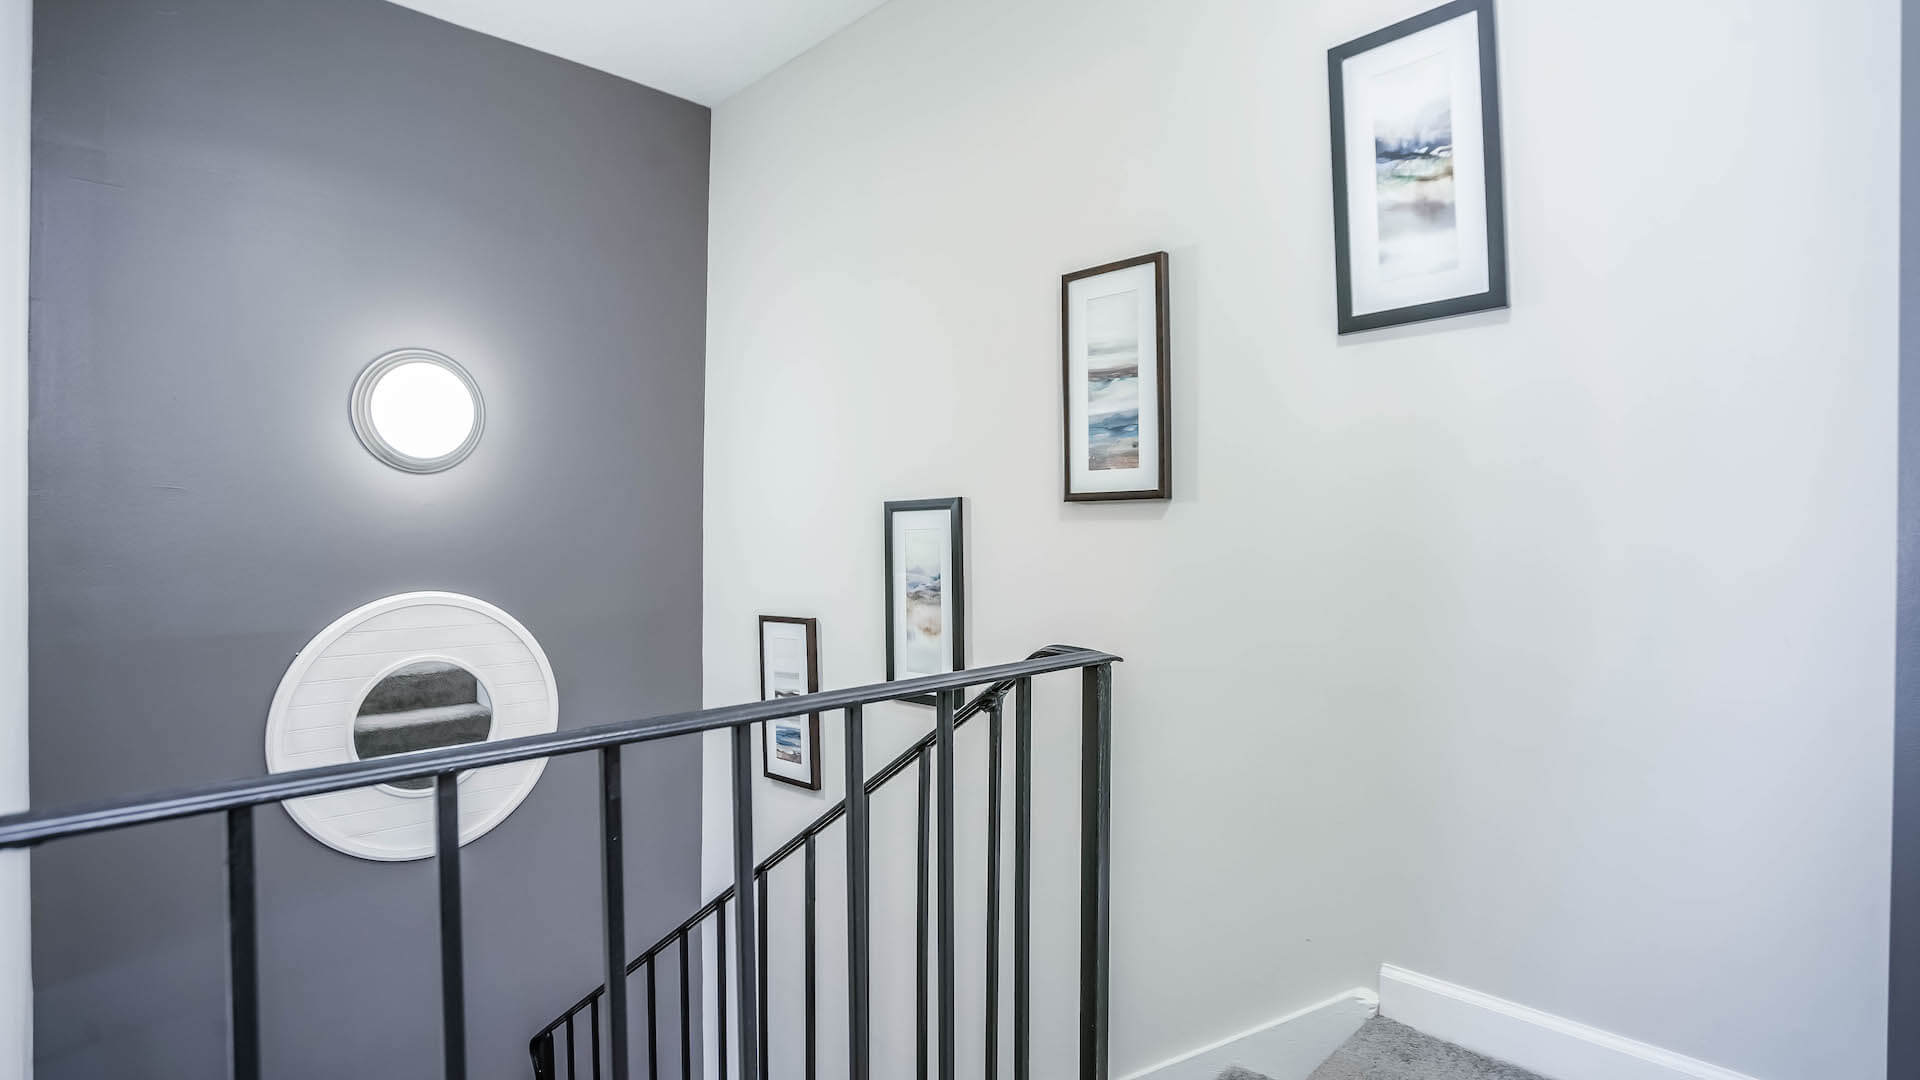 Stairwell in apartment decorated with photos and mirror